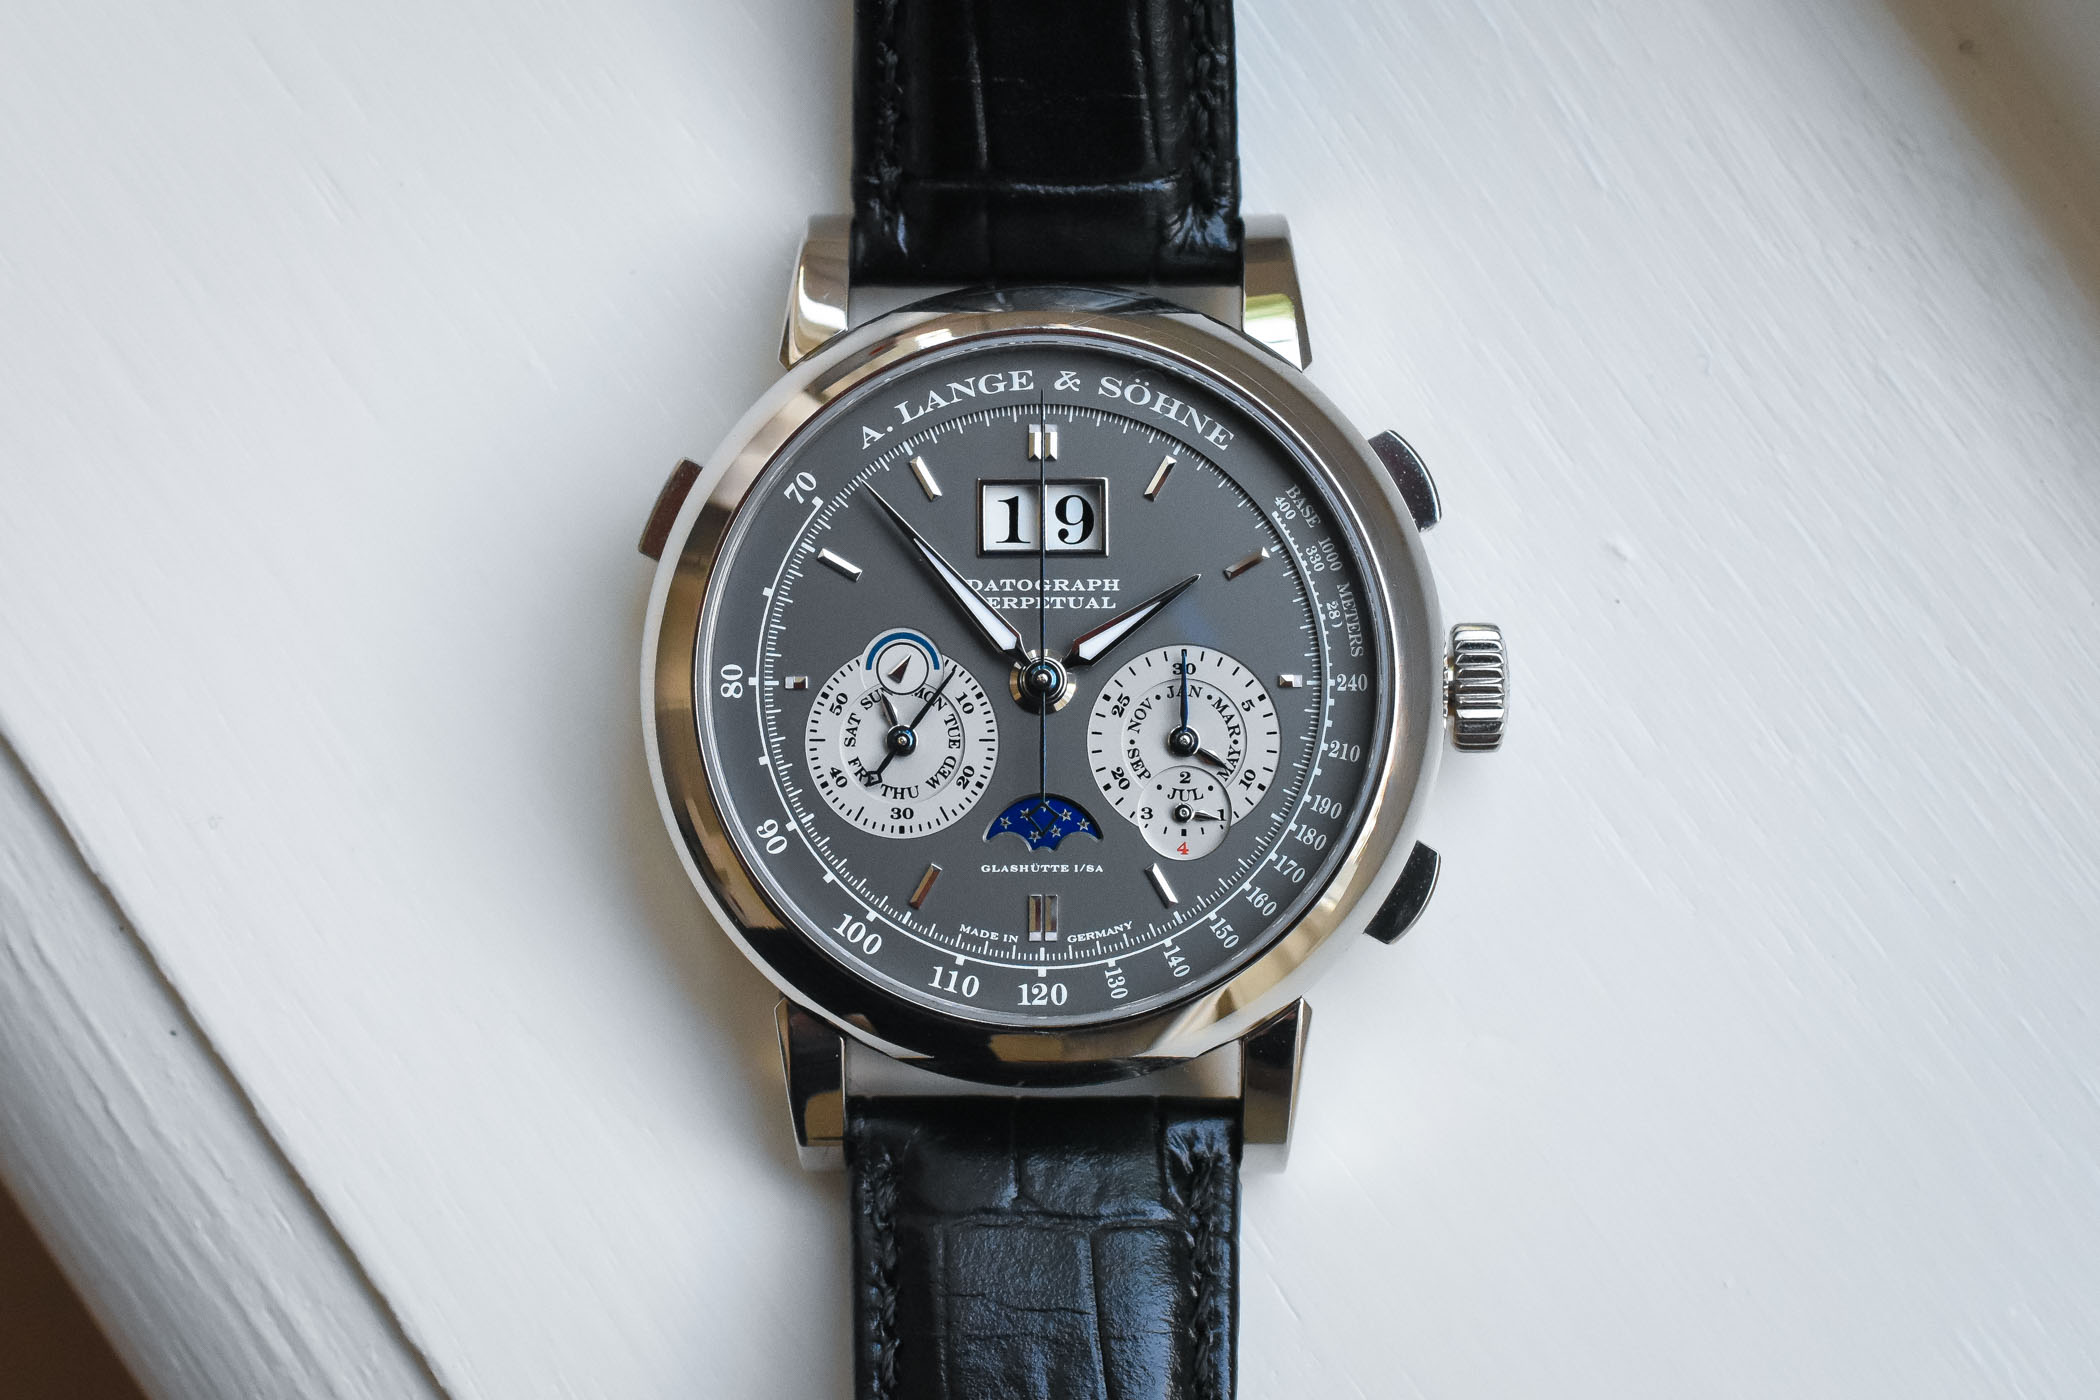 Đồng hồ A Lange & Sohne Datograph Perpetual 